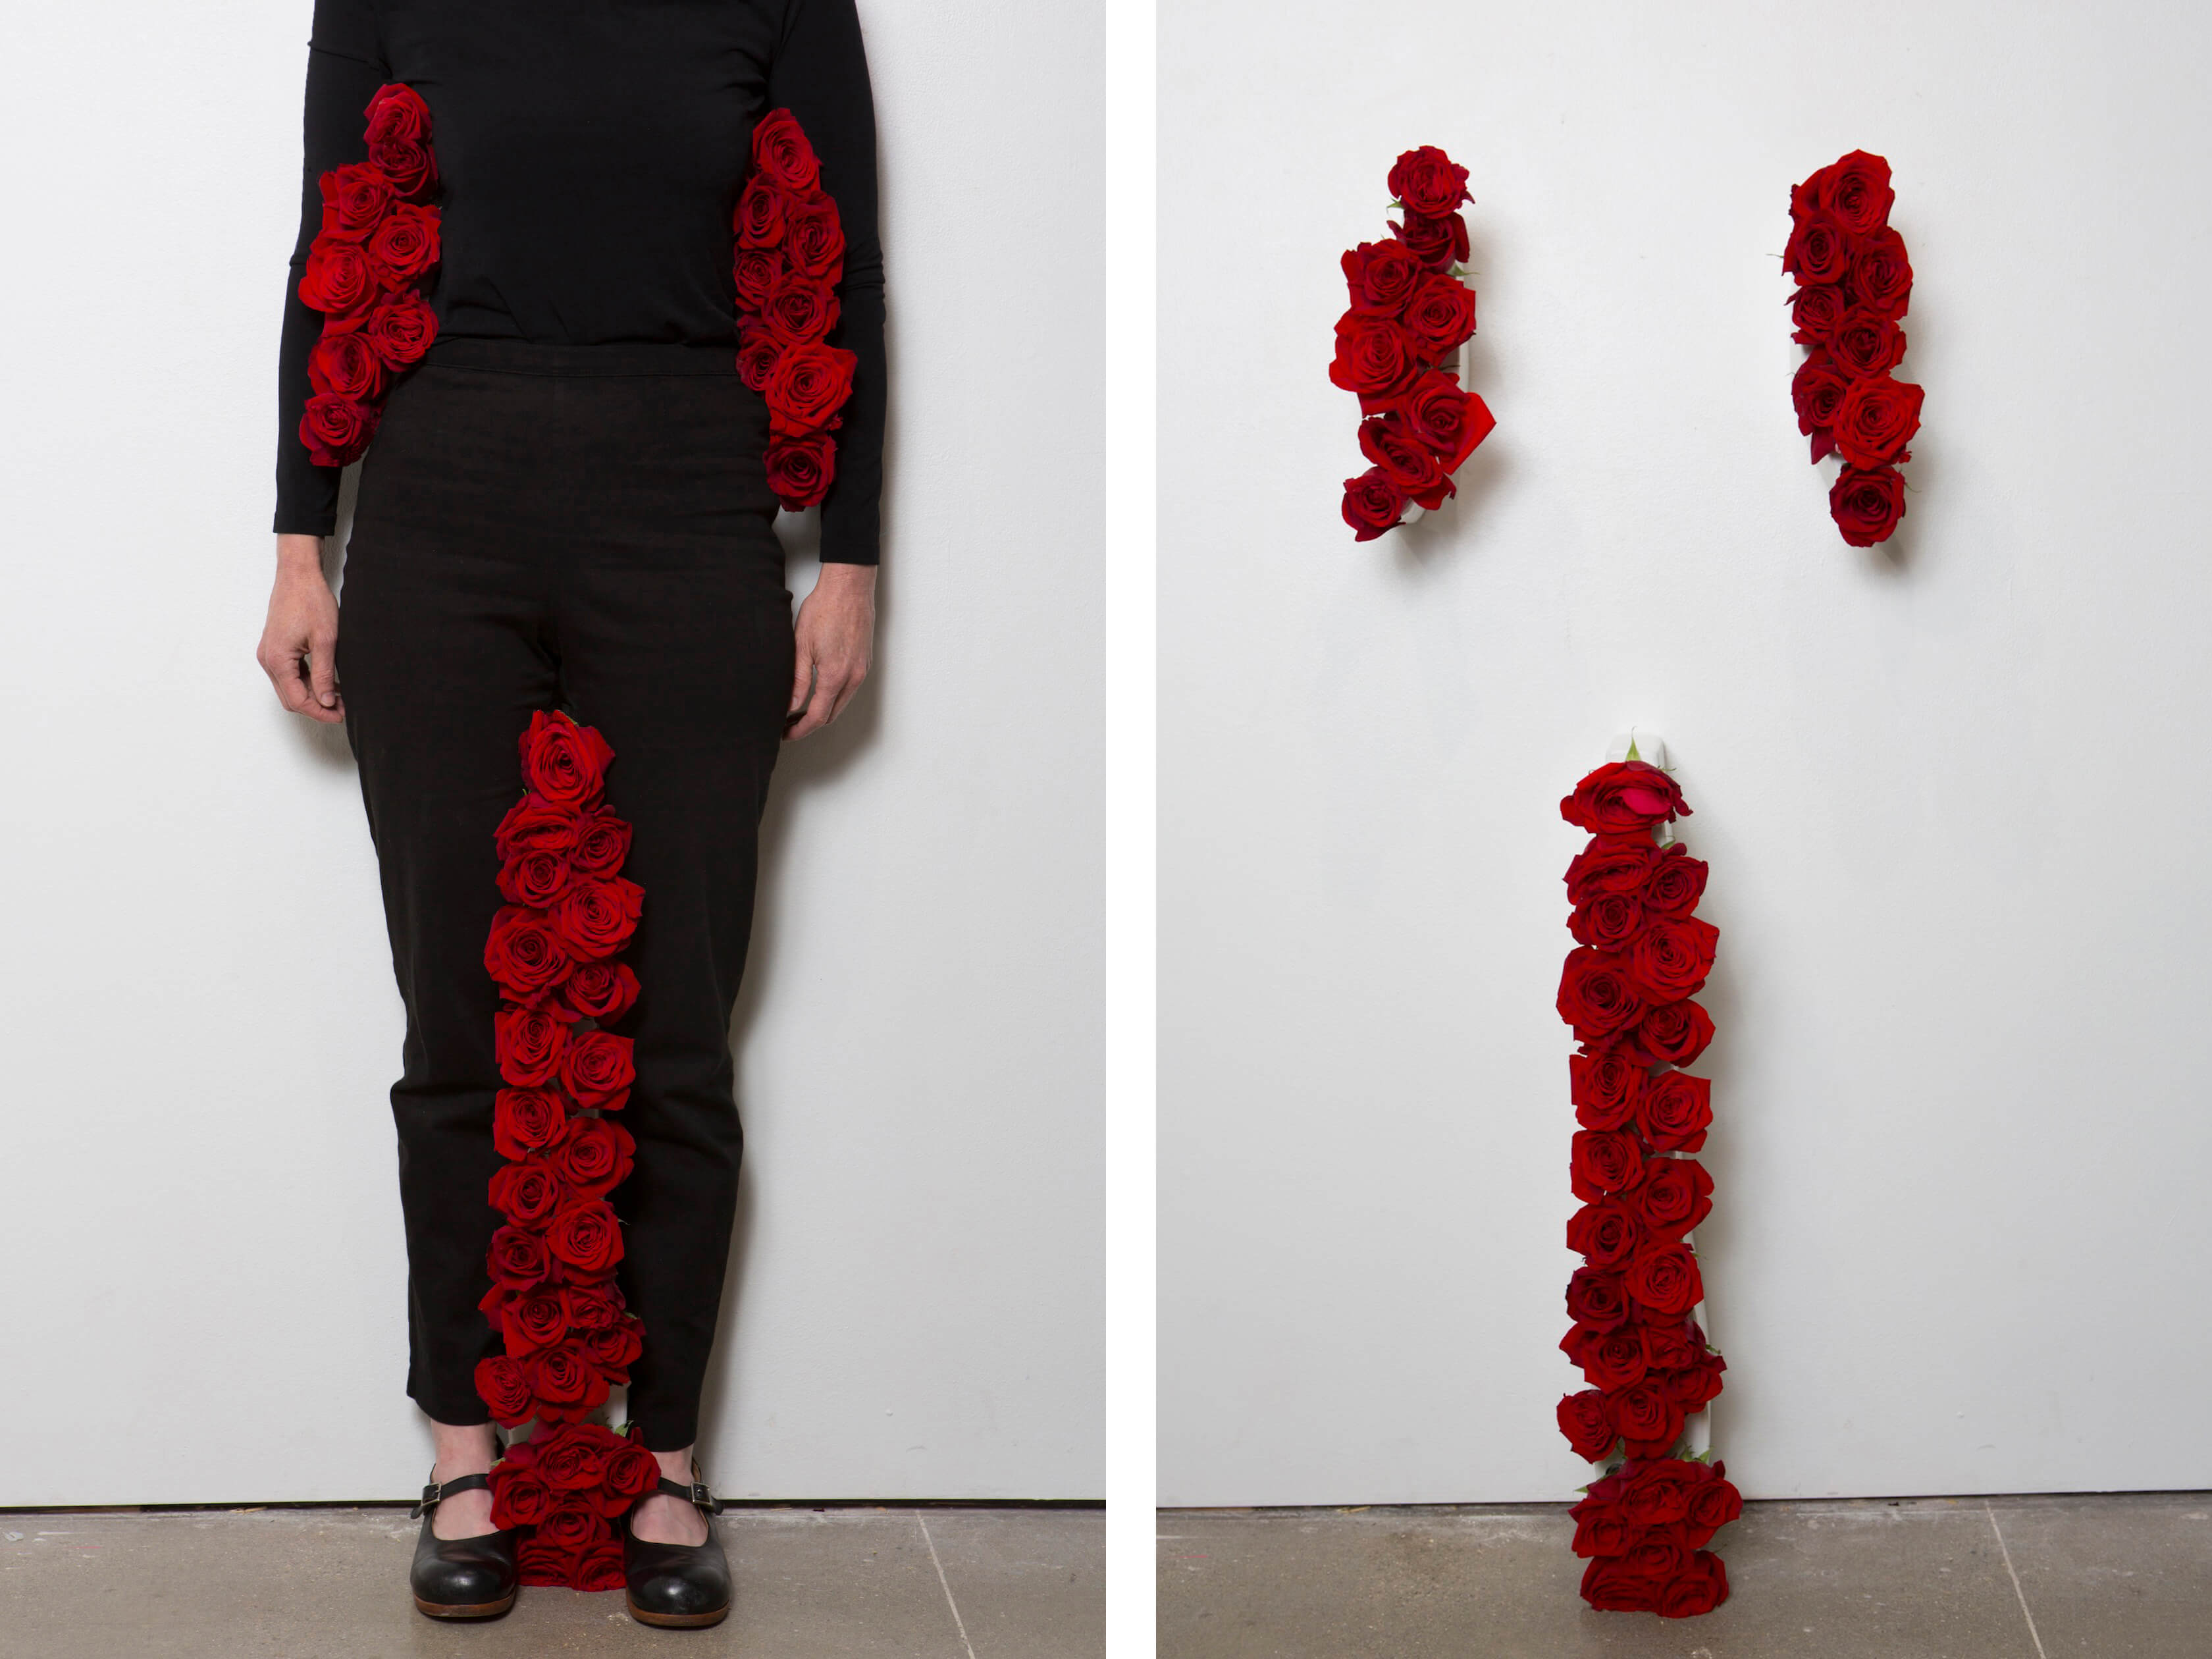 Static Adornment with Roses